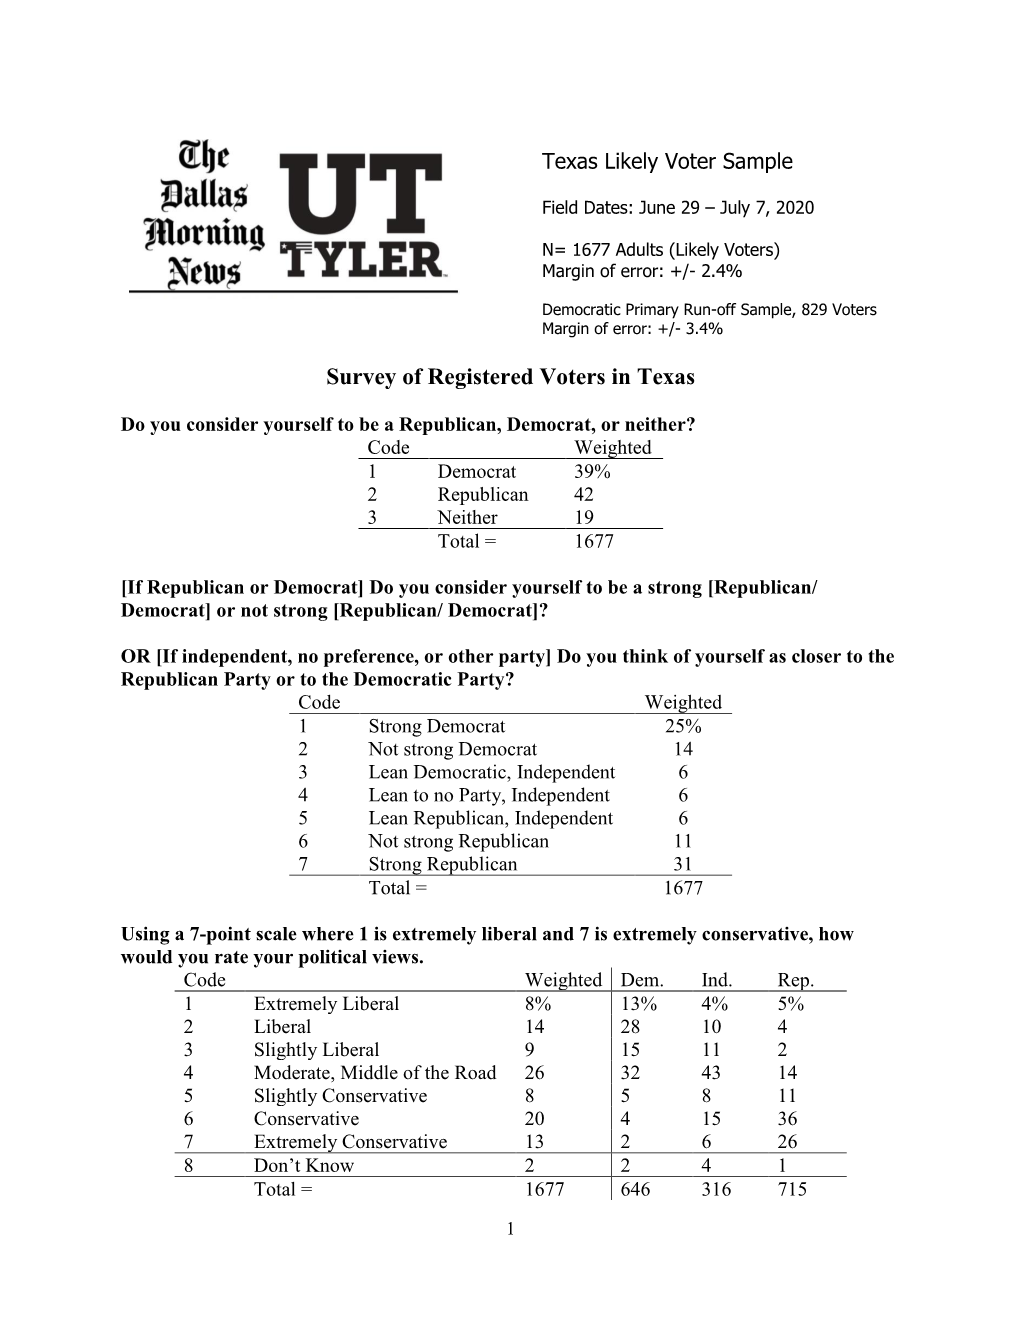 Survey of Registered Voters in Texas